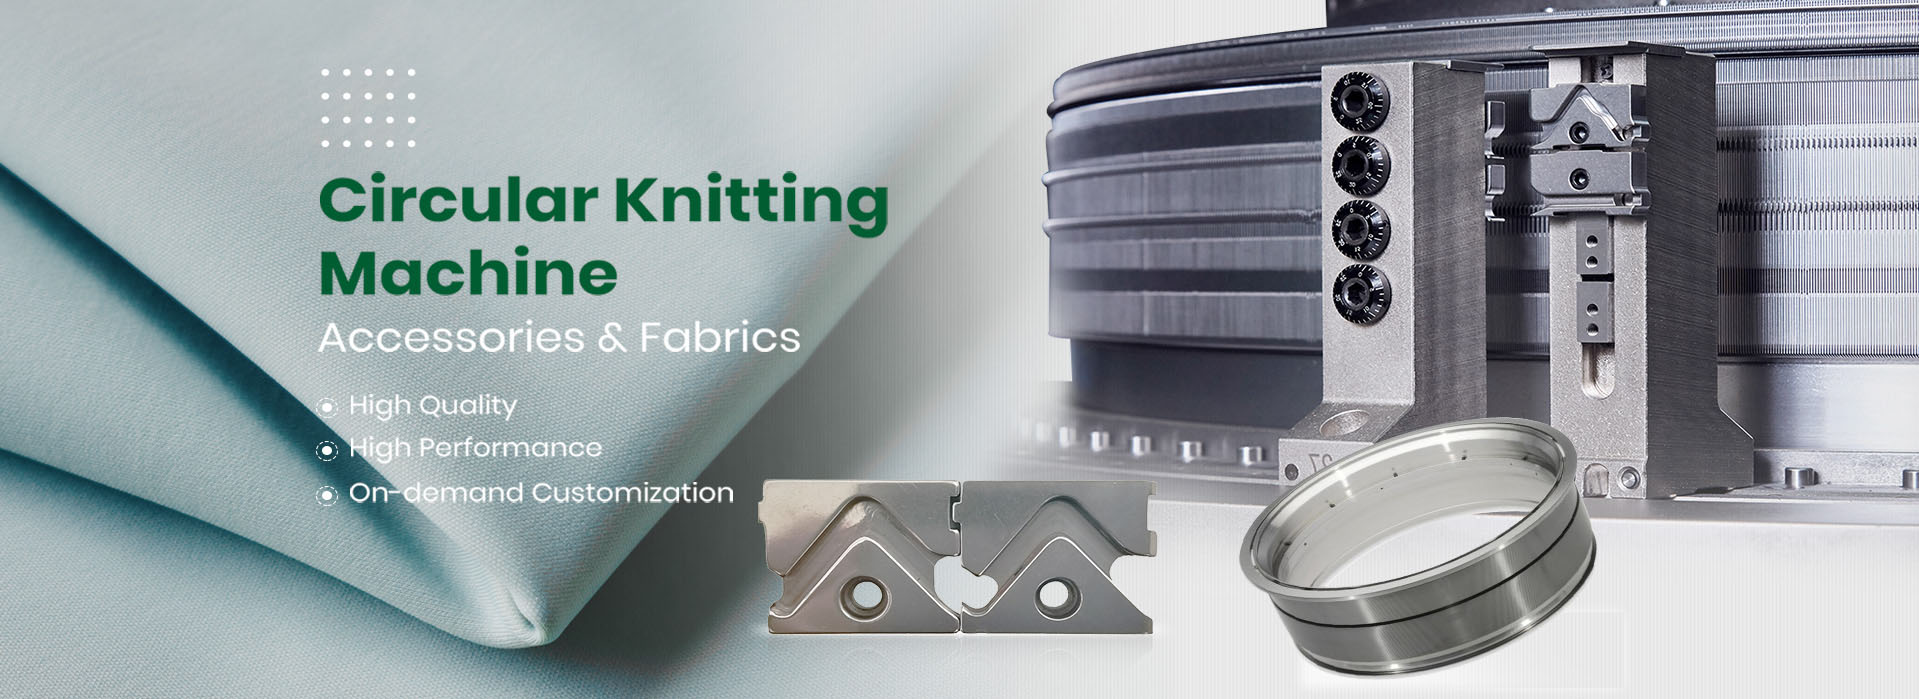 Circular knitting machines Accessories-Spare Parts Supplier